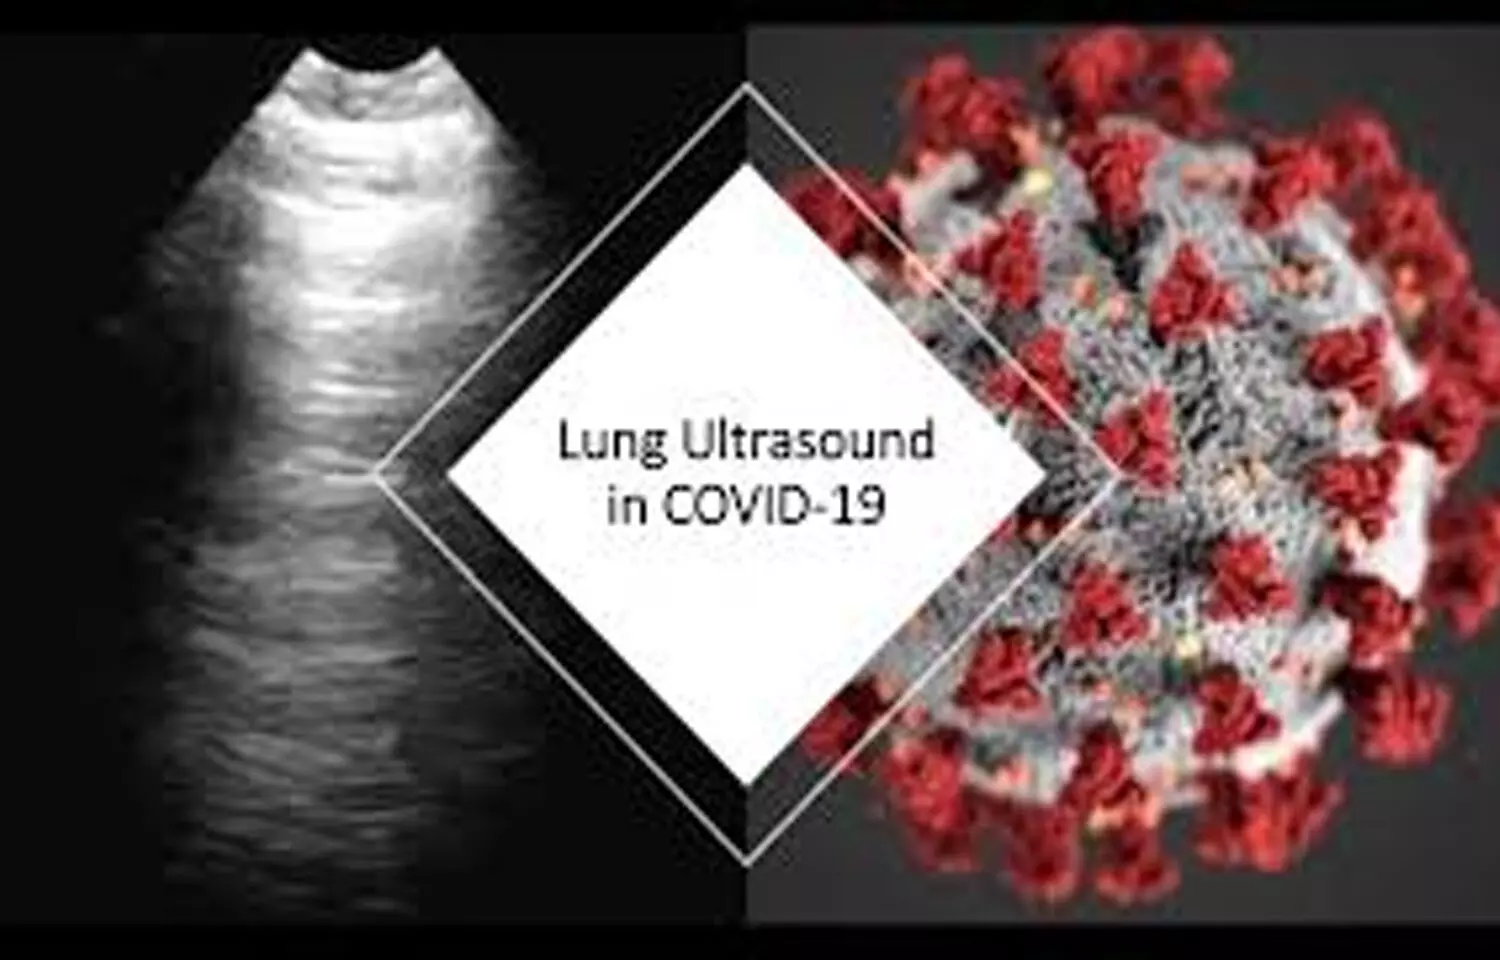 Lung ultrasound convenient for spotting COVID-19 in neonates